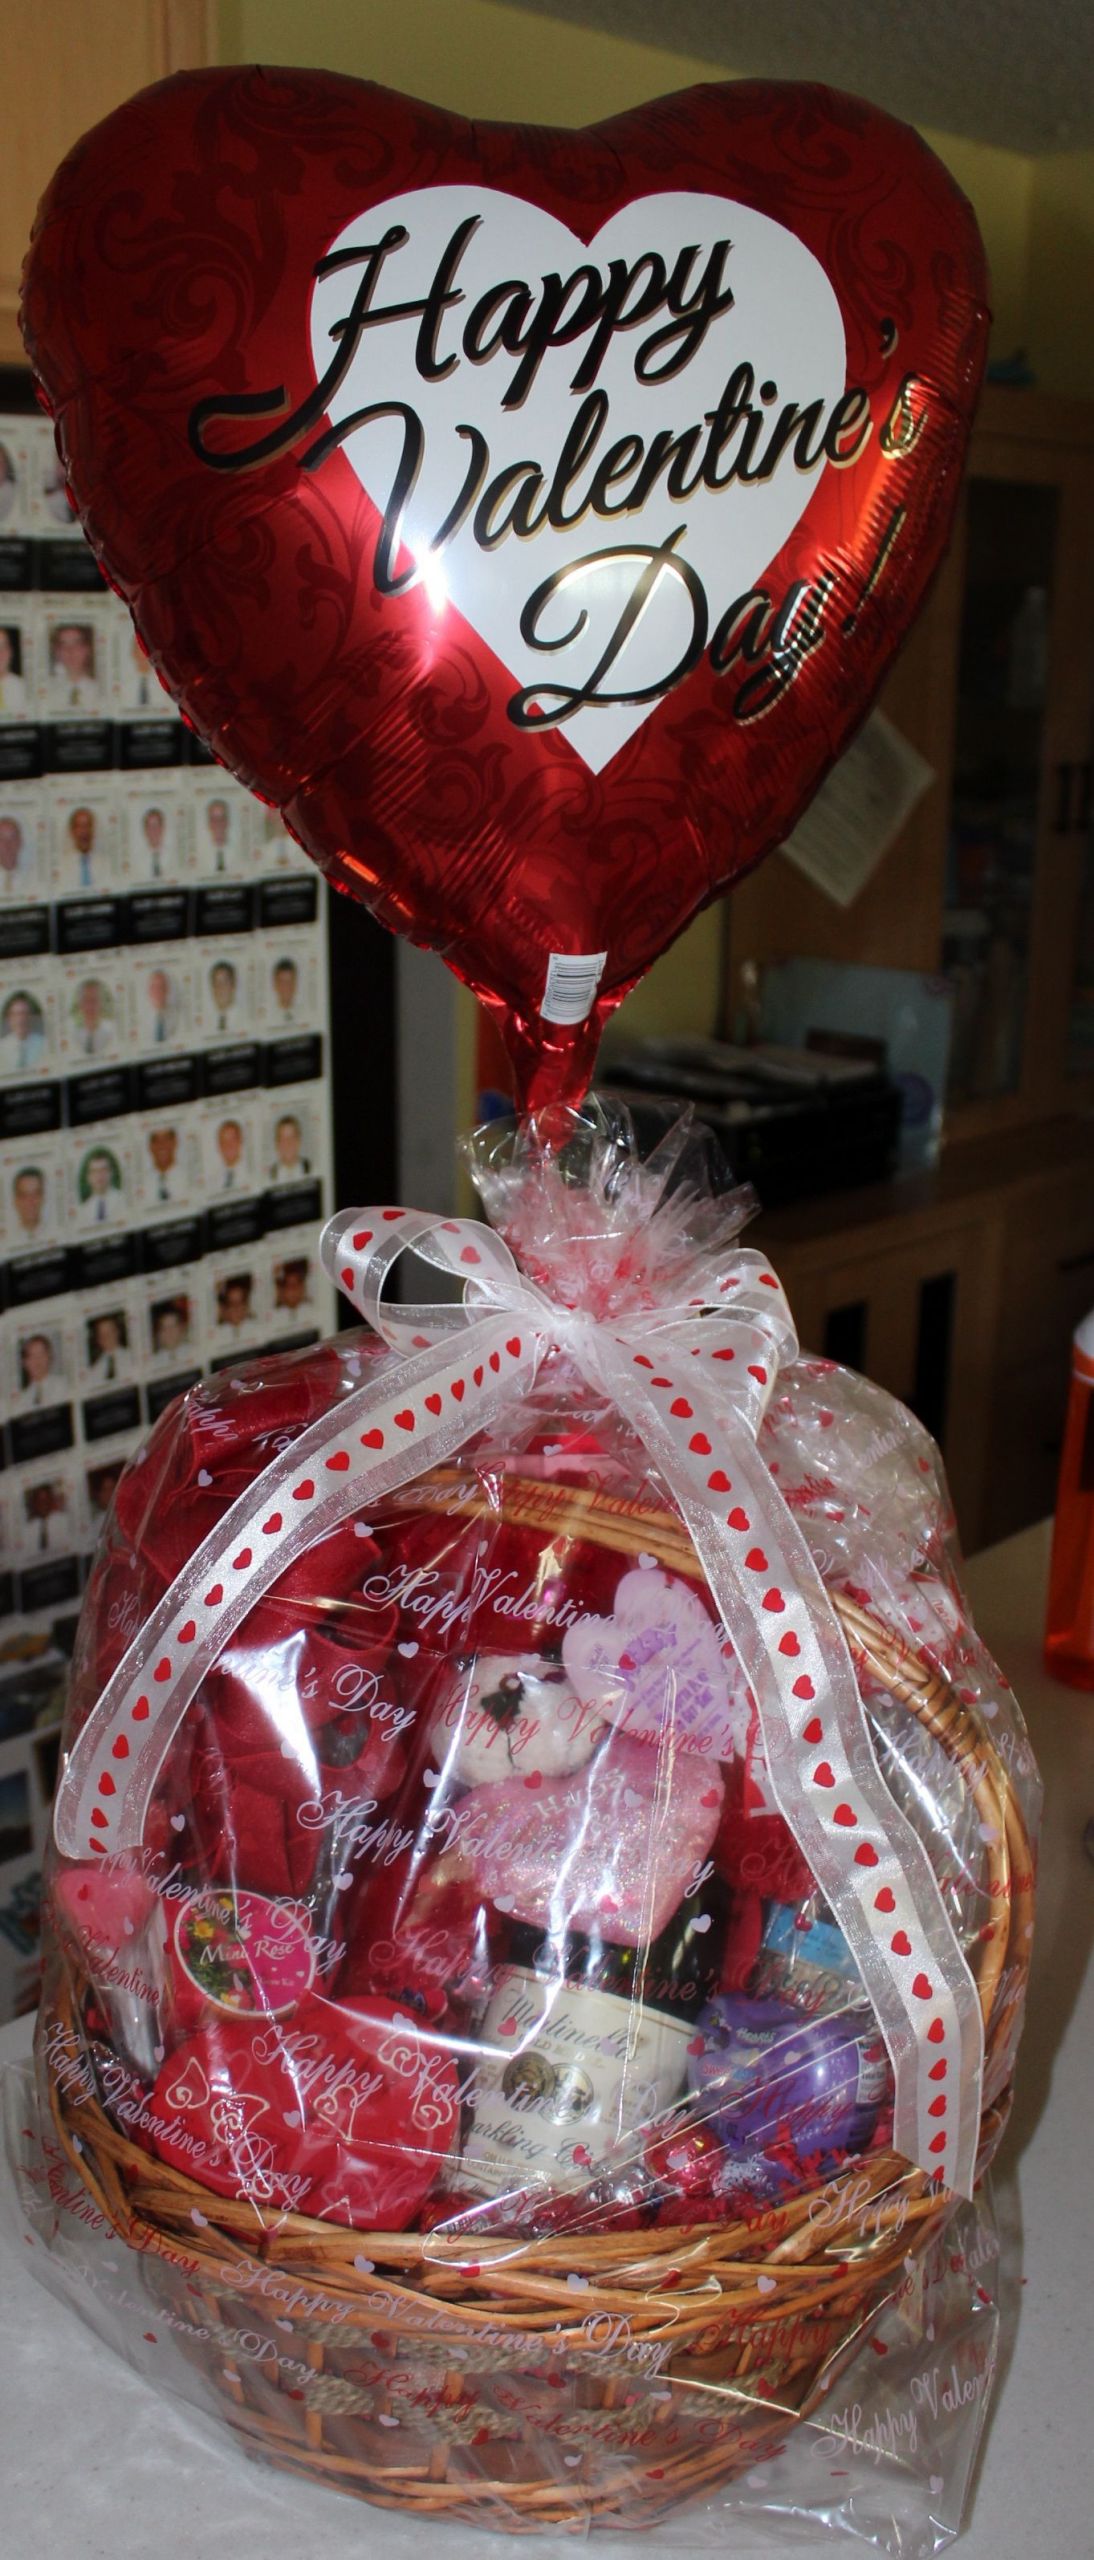 Valentine Day Gift Ideas For Her
 47 How To Make A Valentine Gift Basket For Her Best Idea